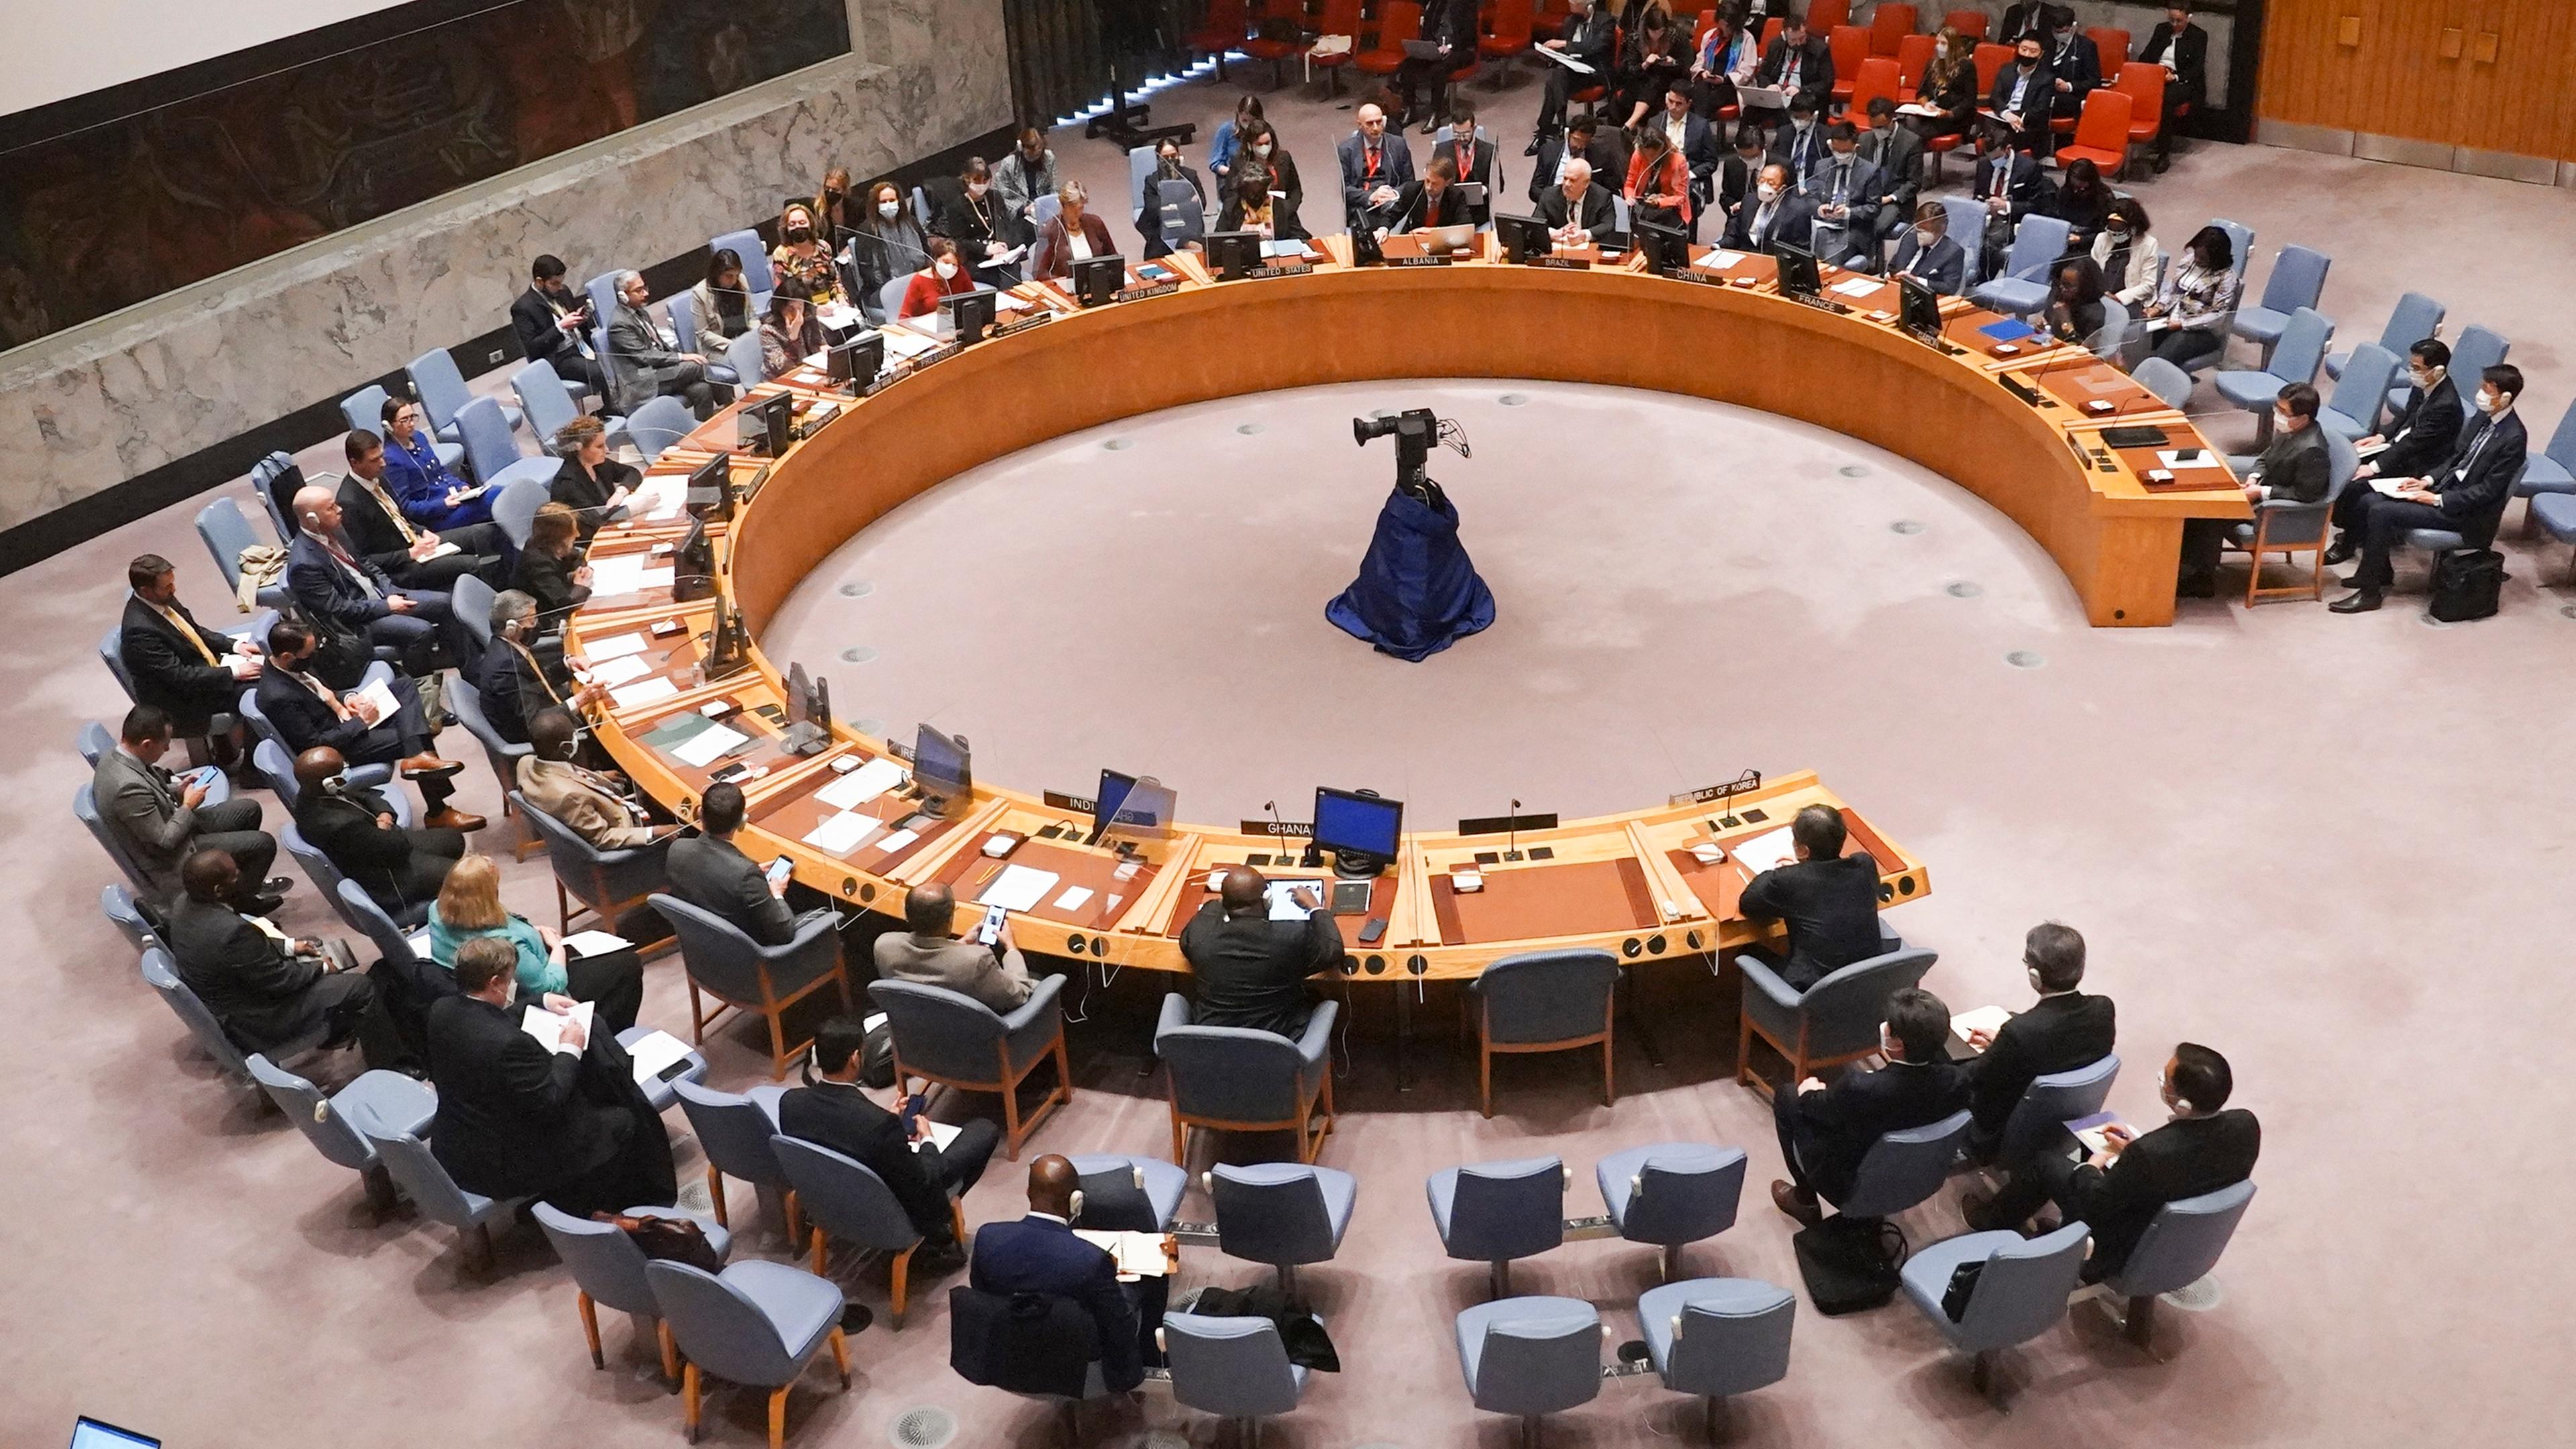 The UN Security Council will meet on March 25, 2022, after North Korea launches an ICBM test.